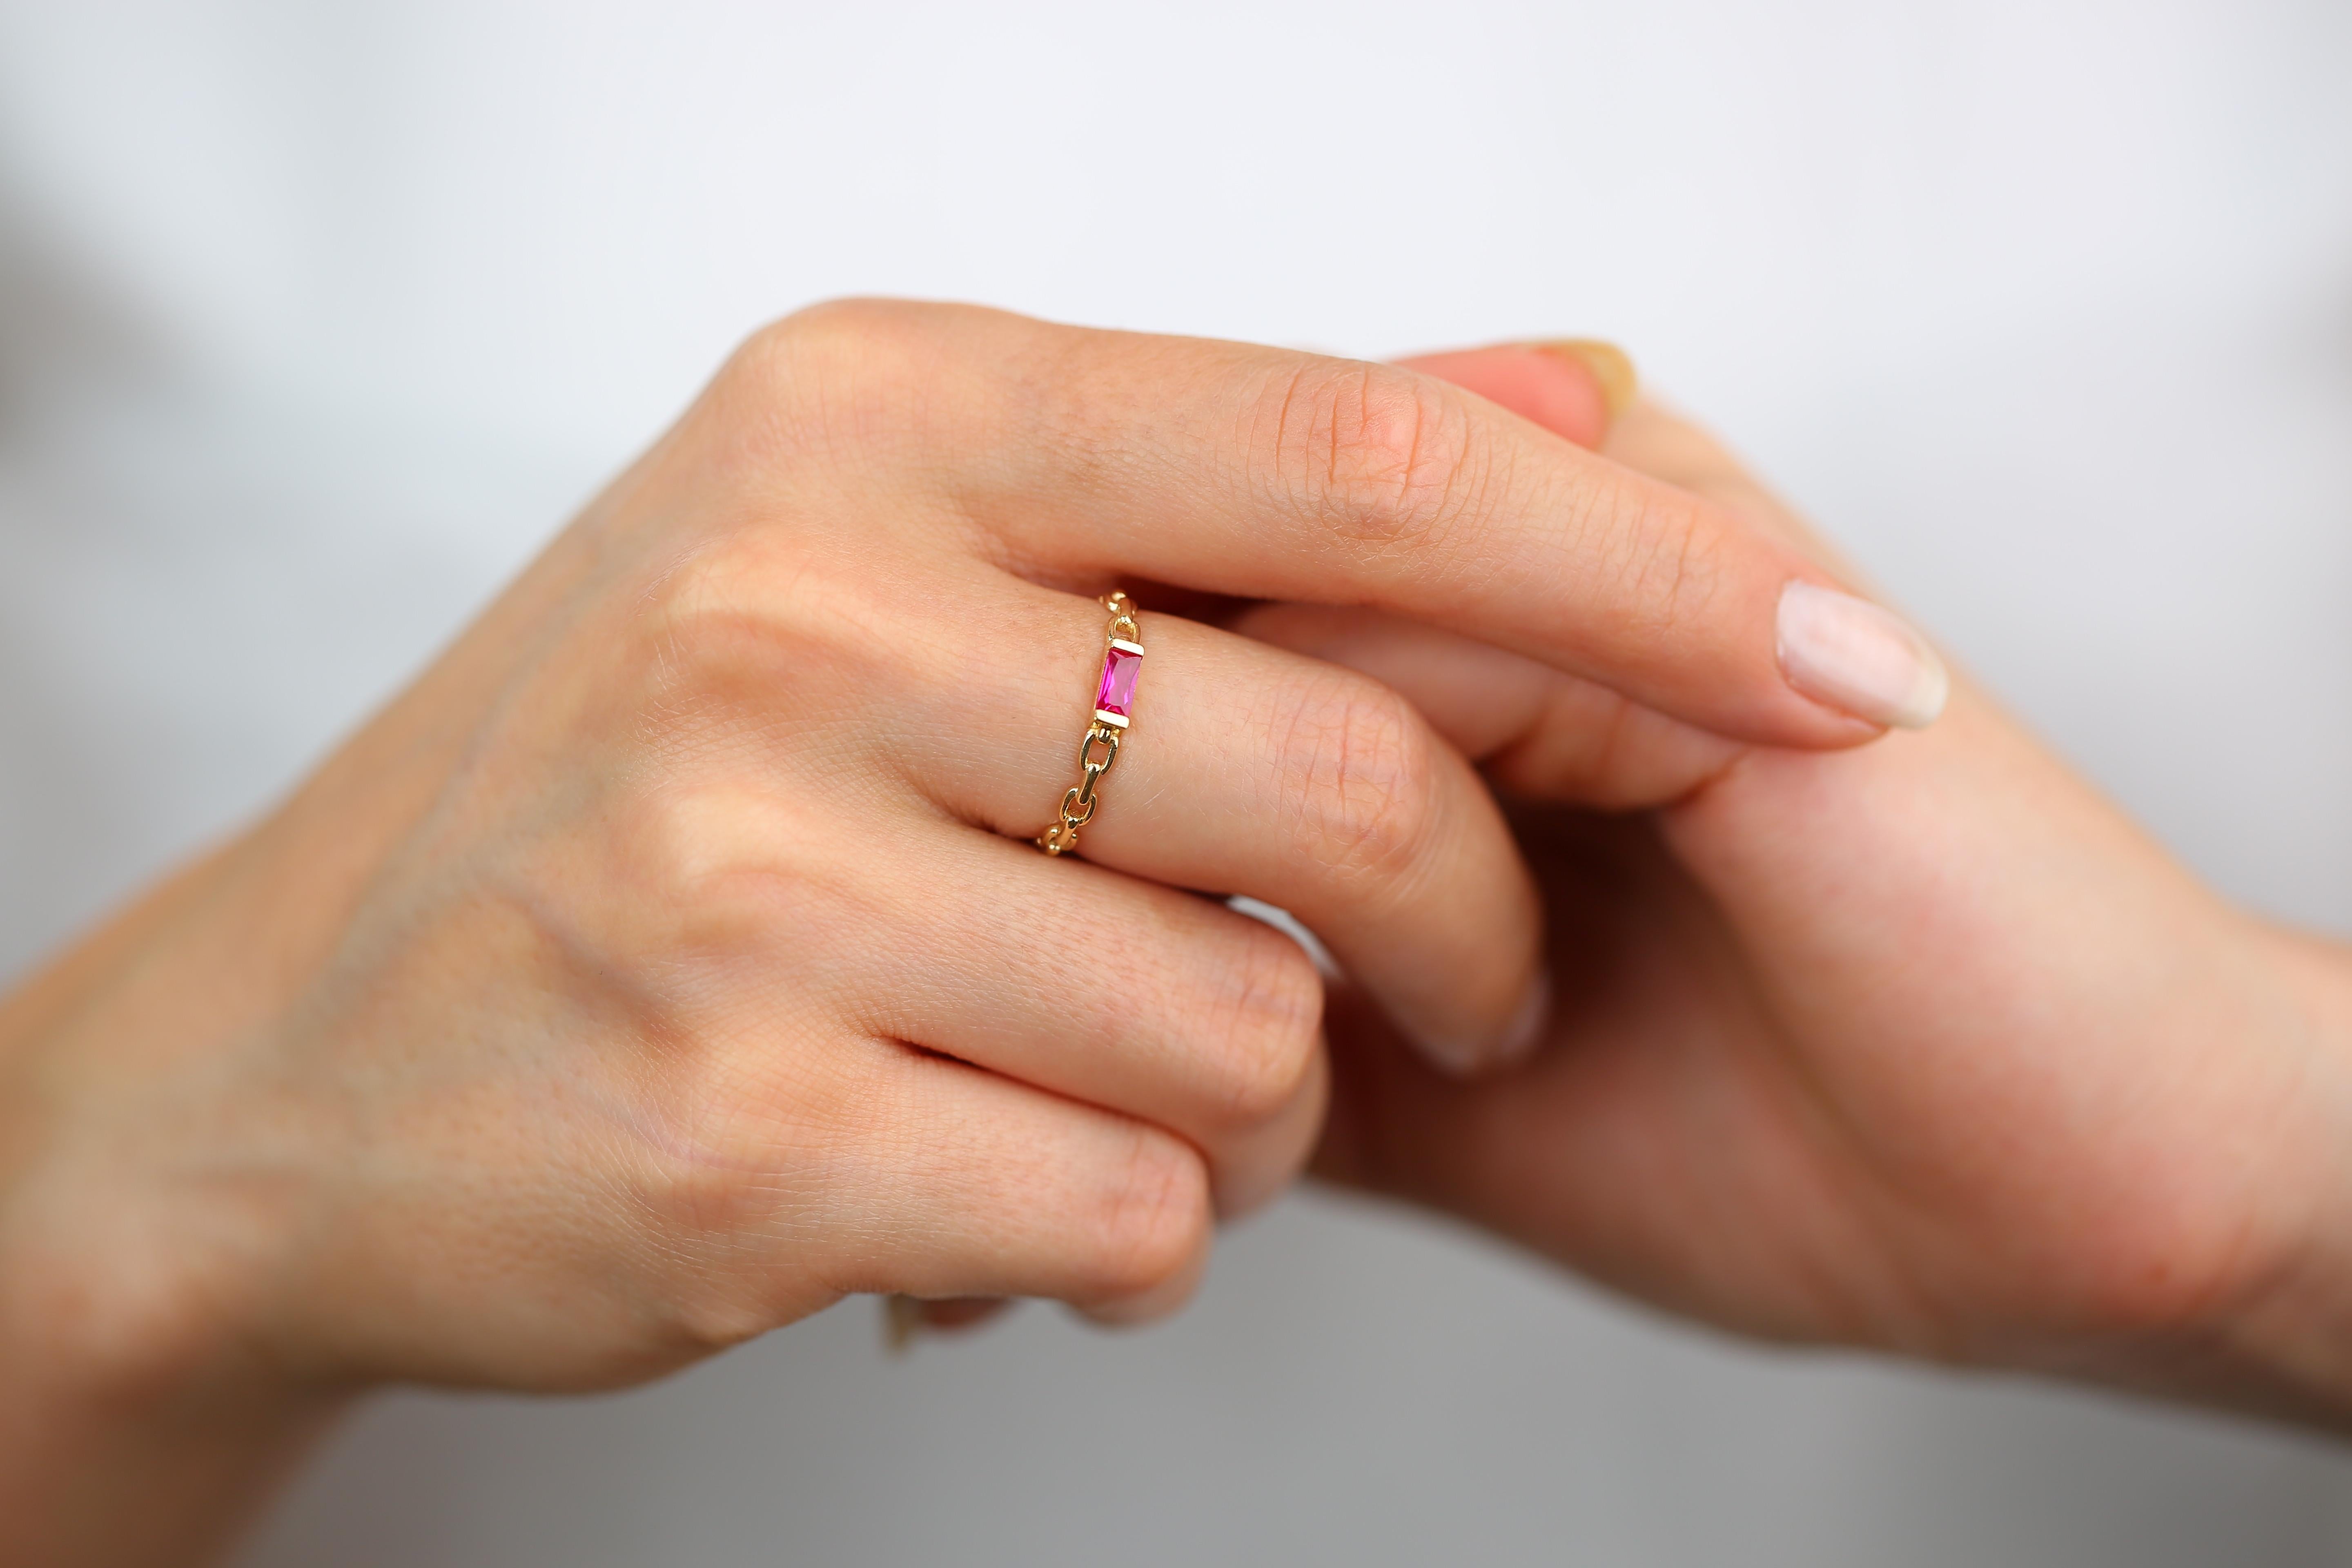 For Sale:  14 K Solid Gold Chain Link Ring -with Pink Quartz, Modern Minimal Ring 10